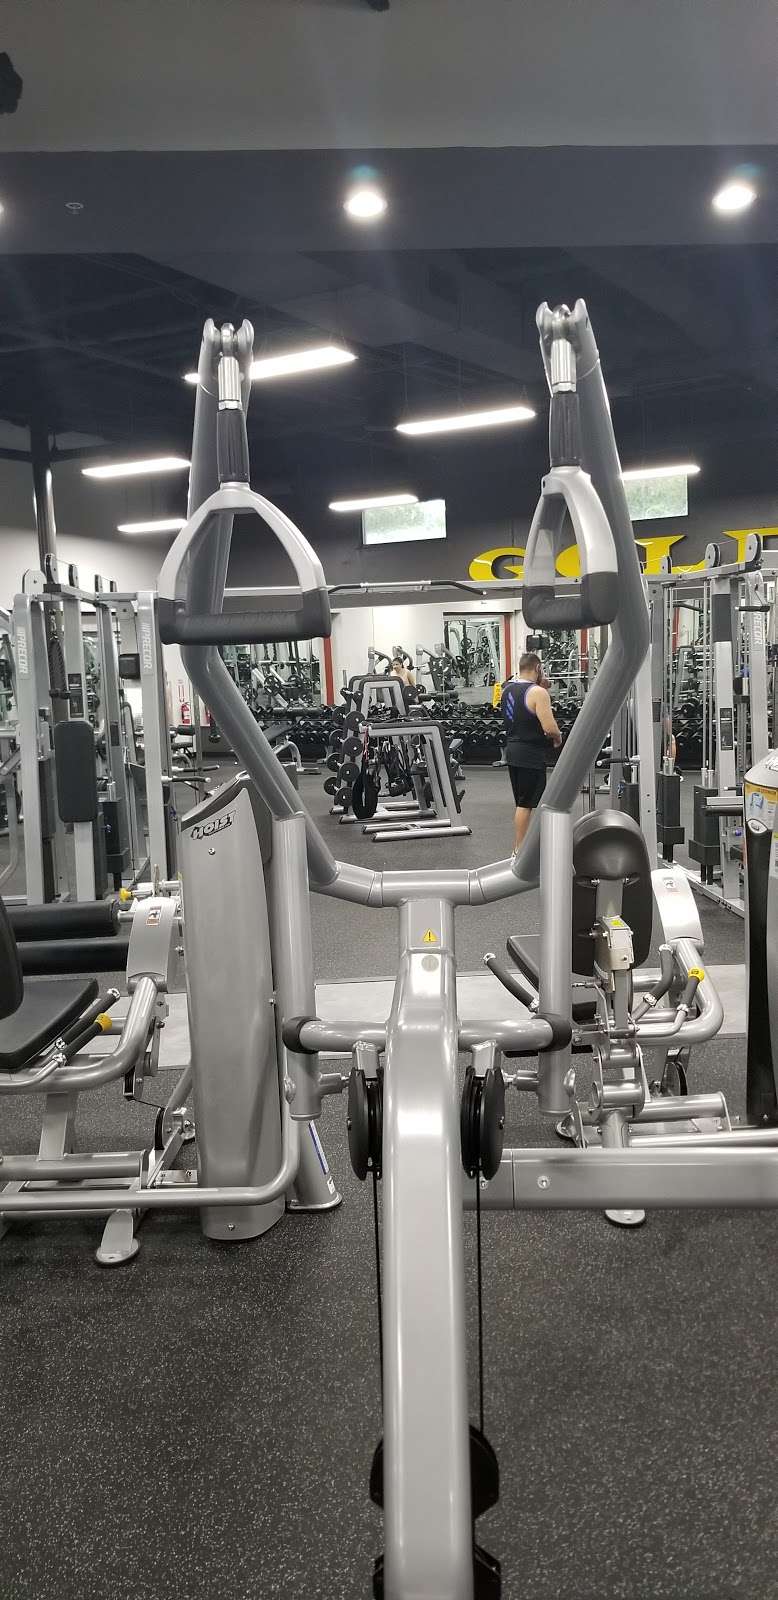 Golds Gym The Woodlands | 4775 W Panther Creek Dr #270, The Woodlands, TX 77381 | Phone: (713) 814-4777